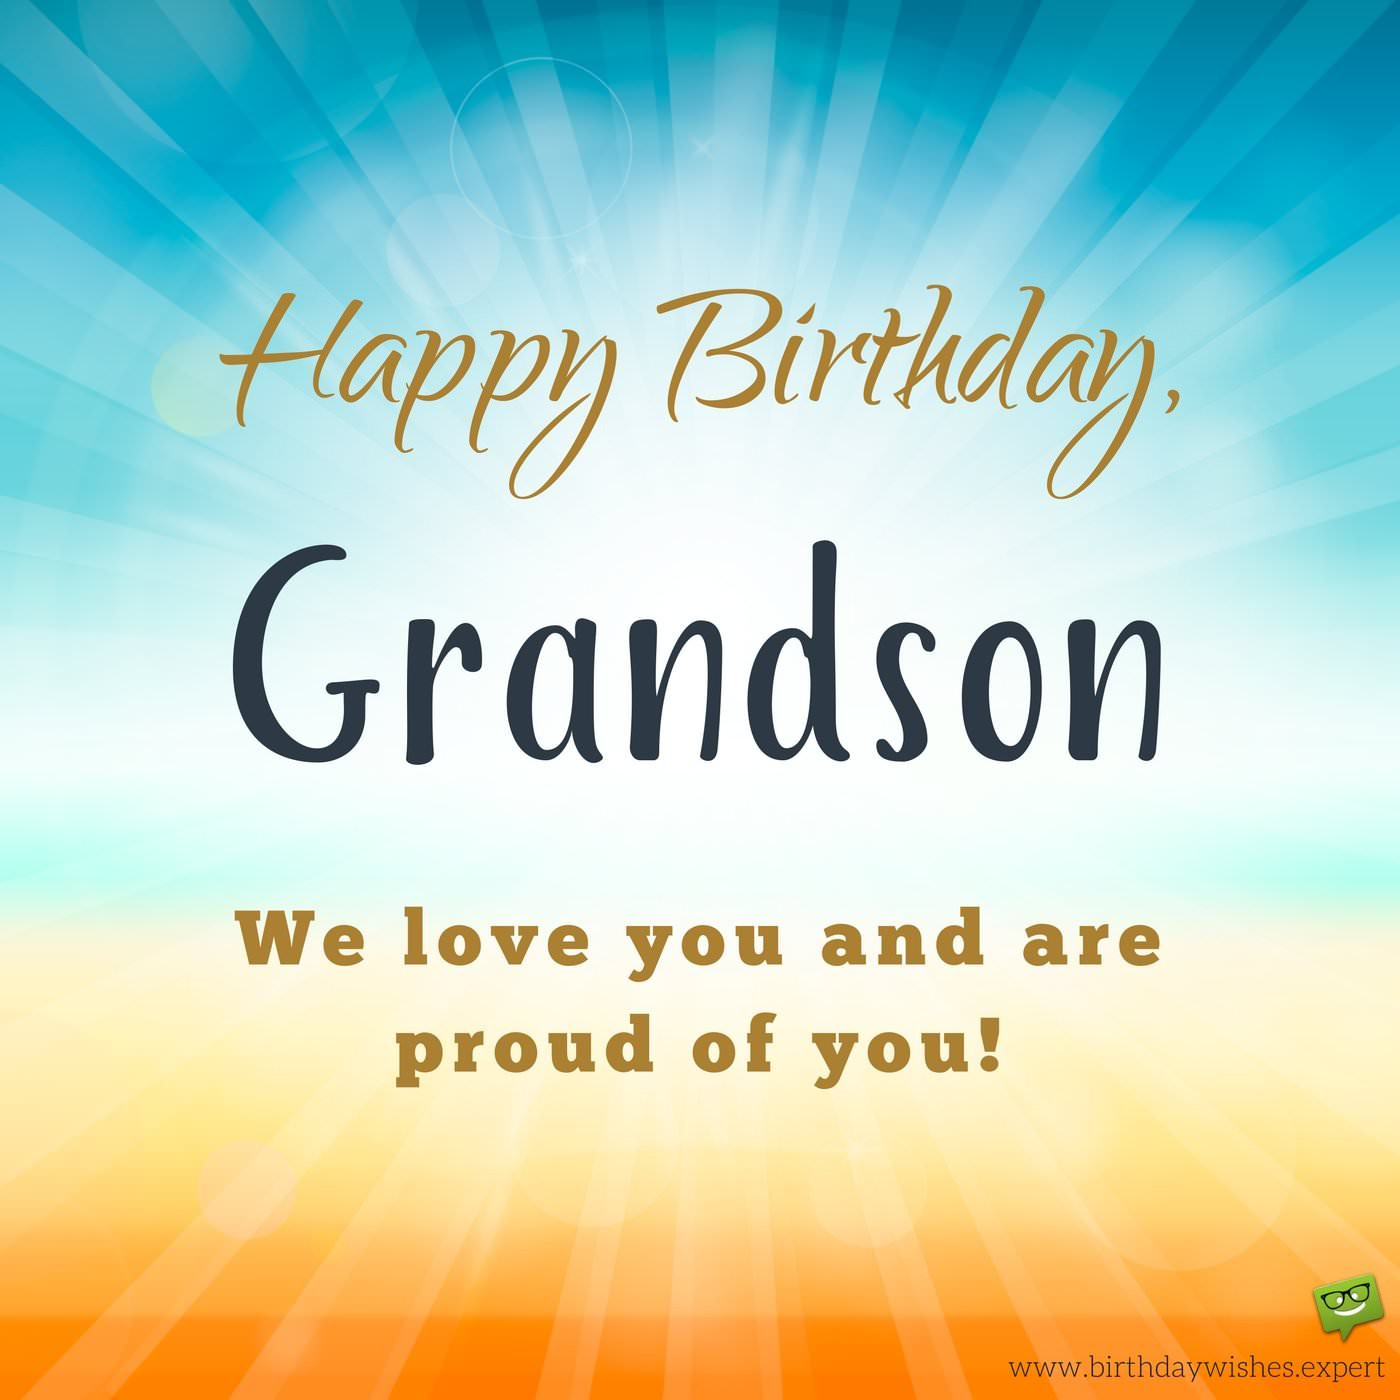 Birthday Quotes For Grandson
 From your Grandma & Grandpa Birthday Wishes for my Grandson